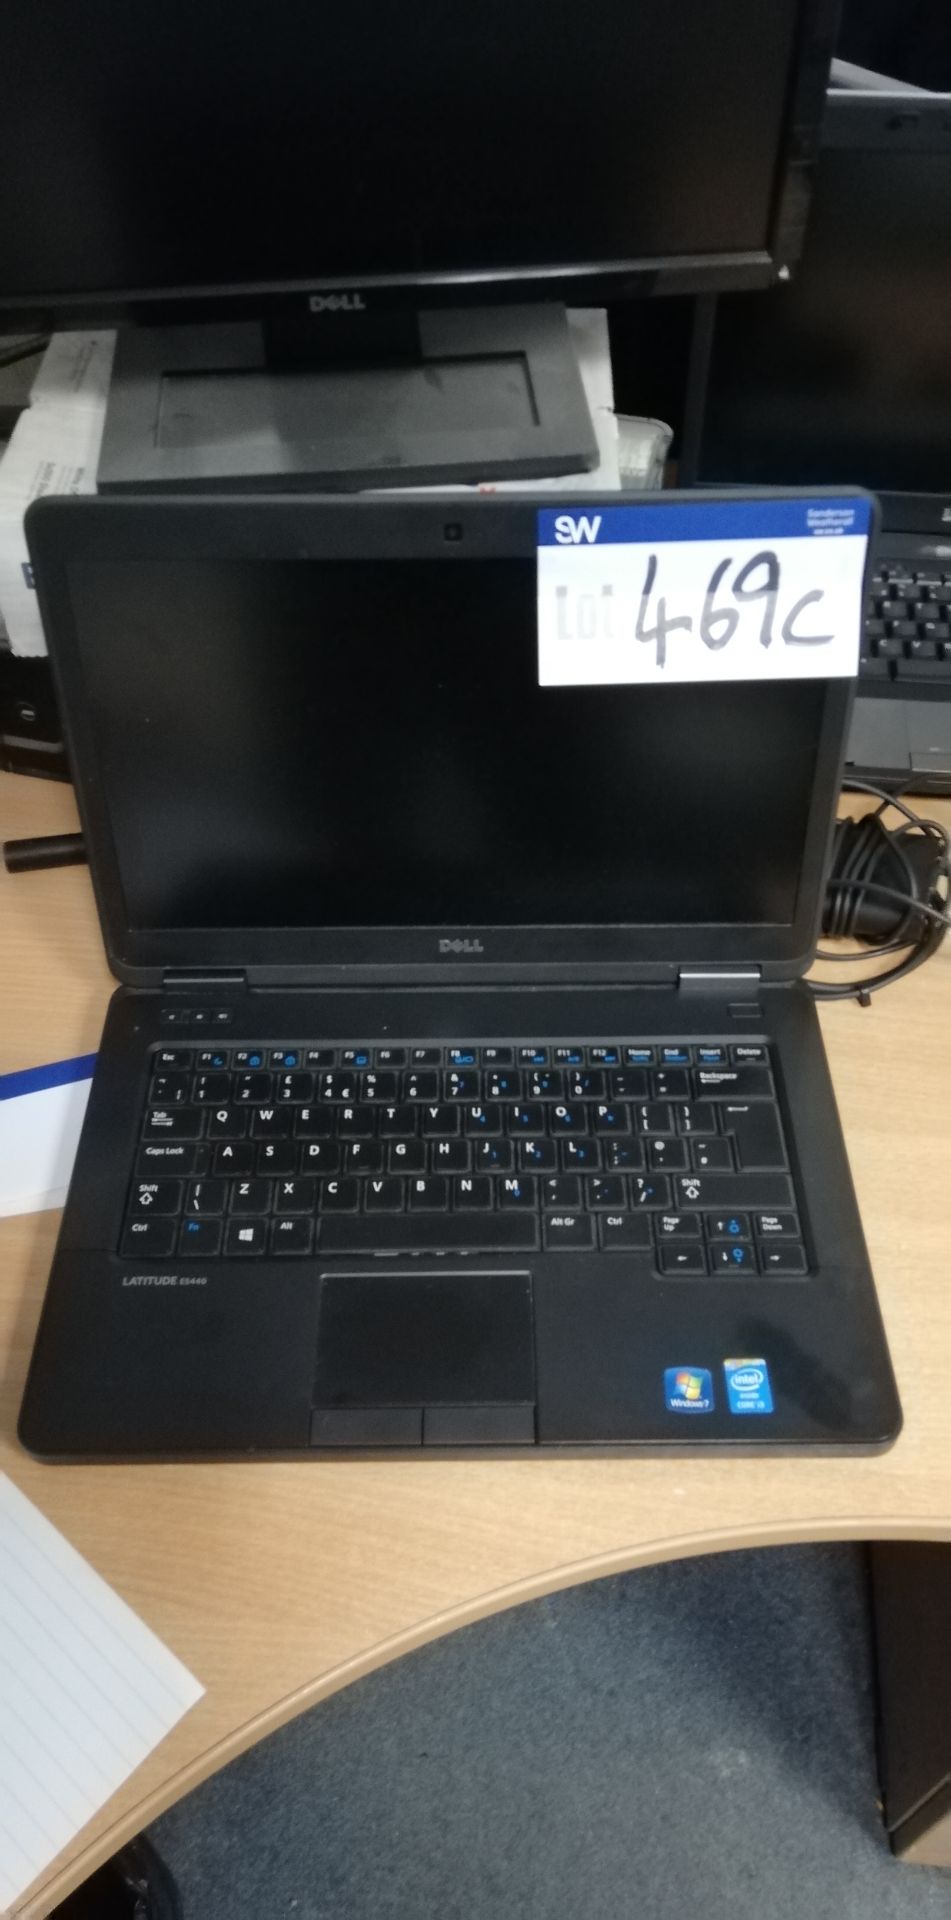 Dell Latitude E5440 Intel Core i3 Laptop (hard disk removed), serial no. HF45V21, with power